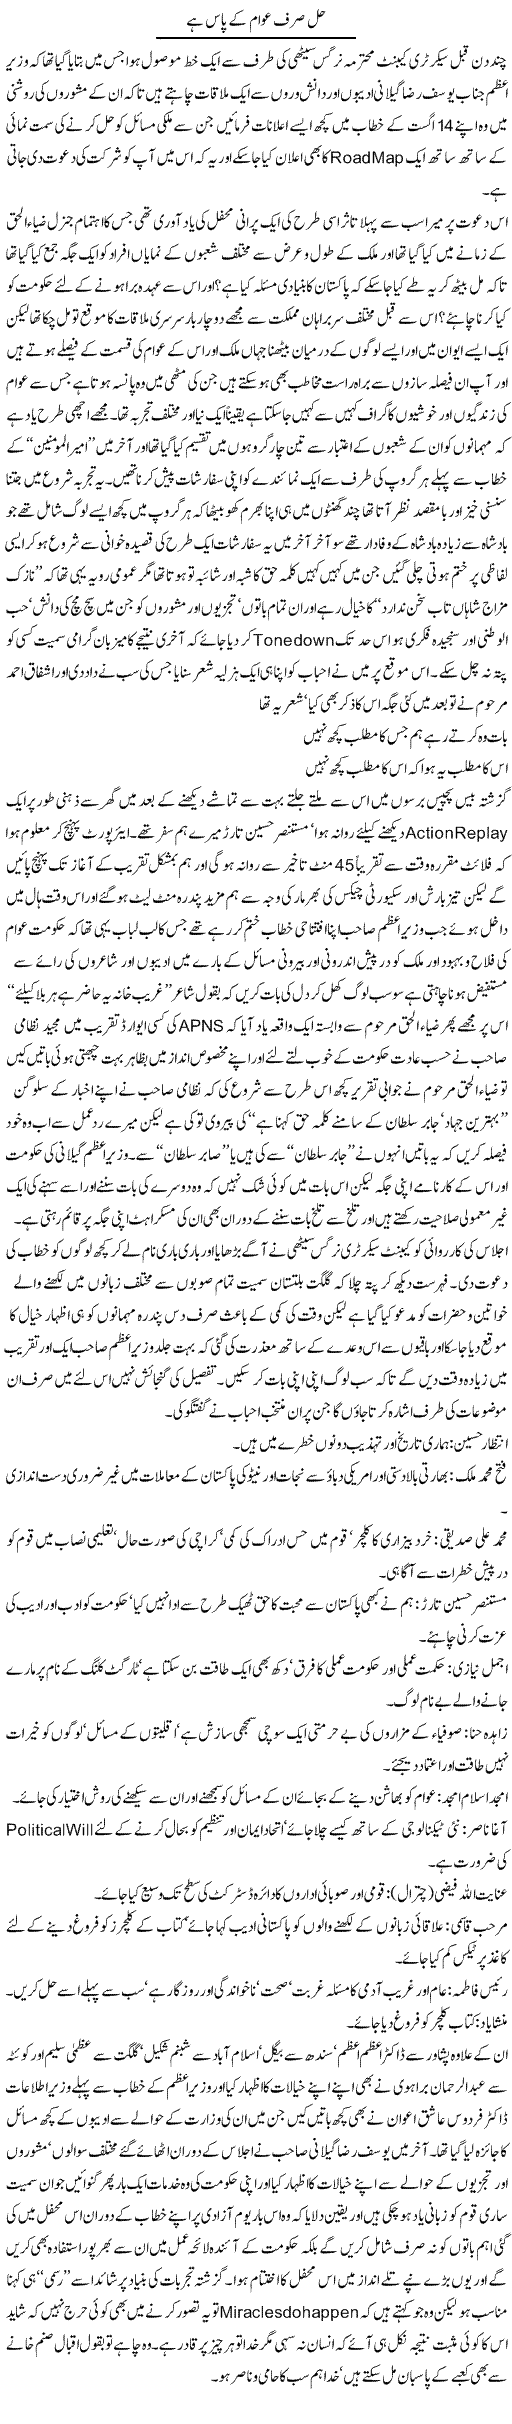 Letter From Nargis Express Column Amjad Islam 28 July 2011